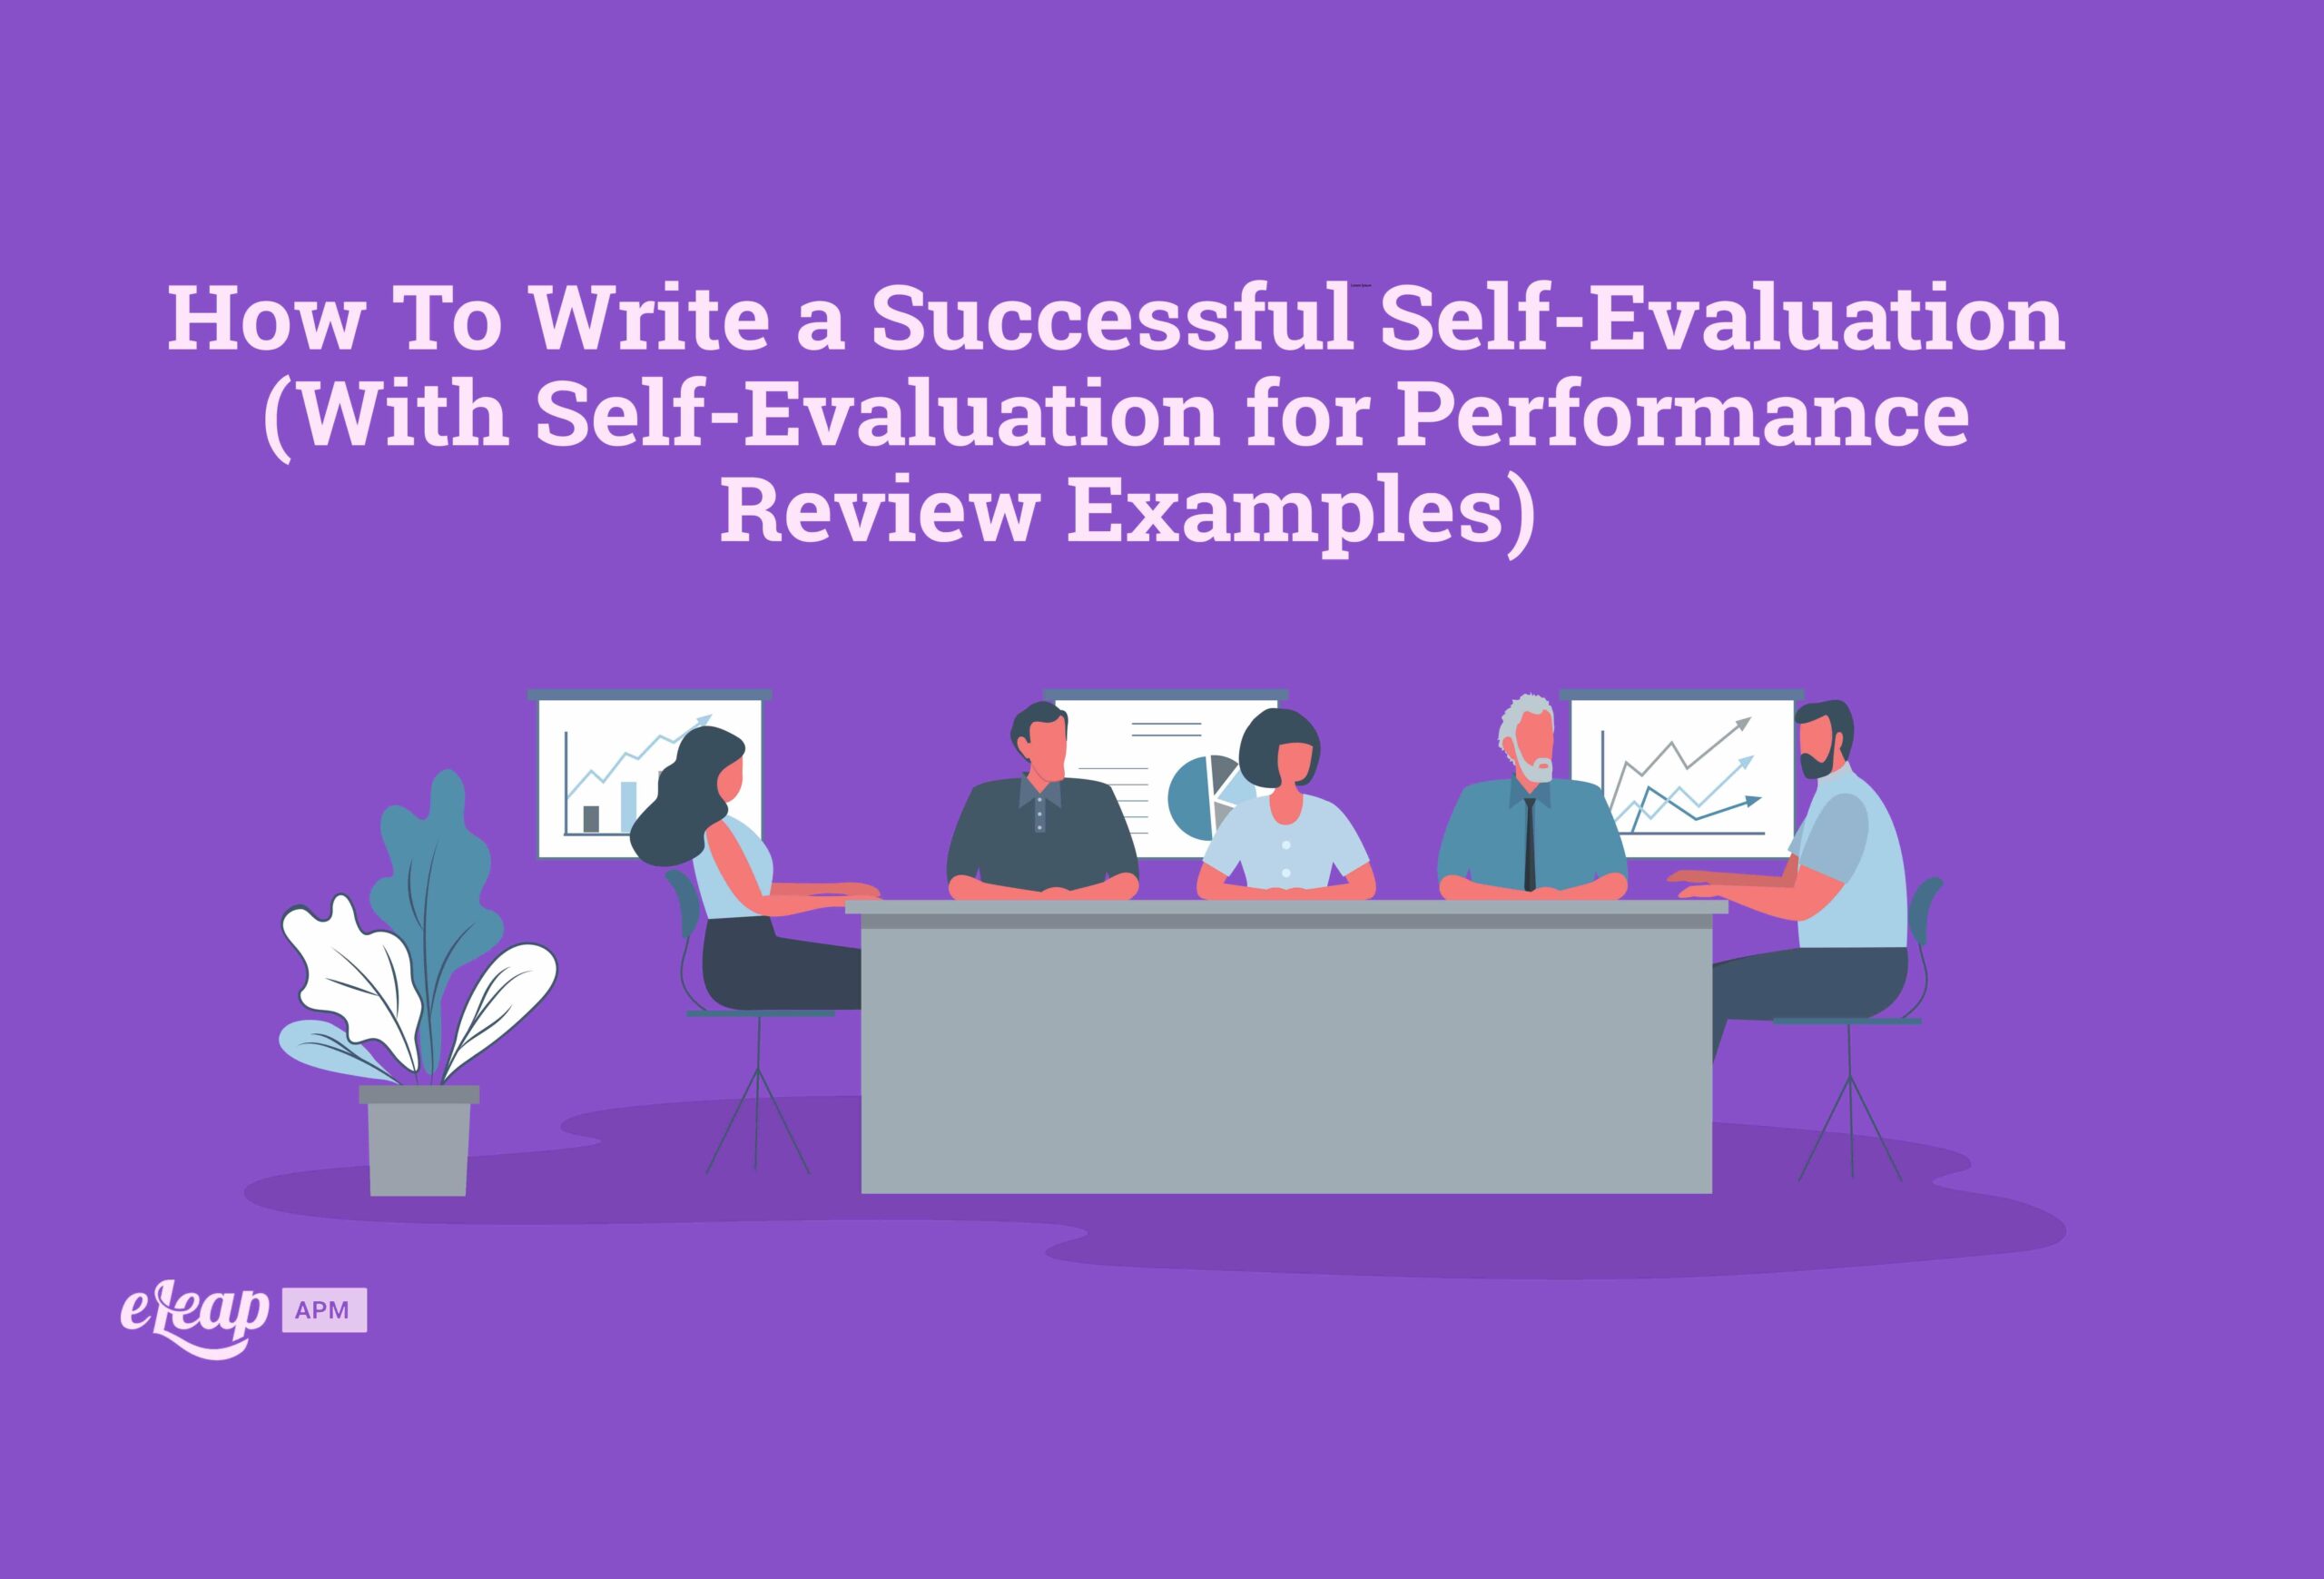 How To Write a Successful Self-Evaluation (With Self-Evaluation for Performance Review Examples)